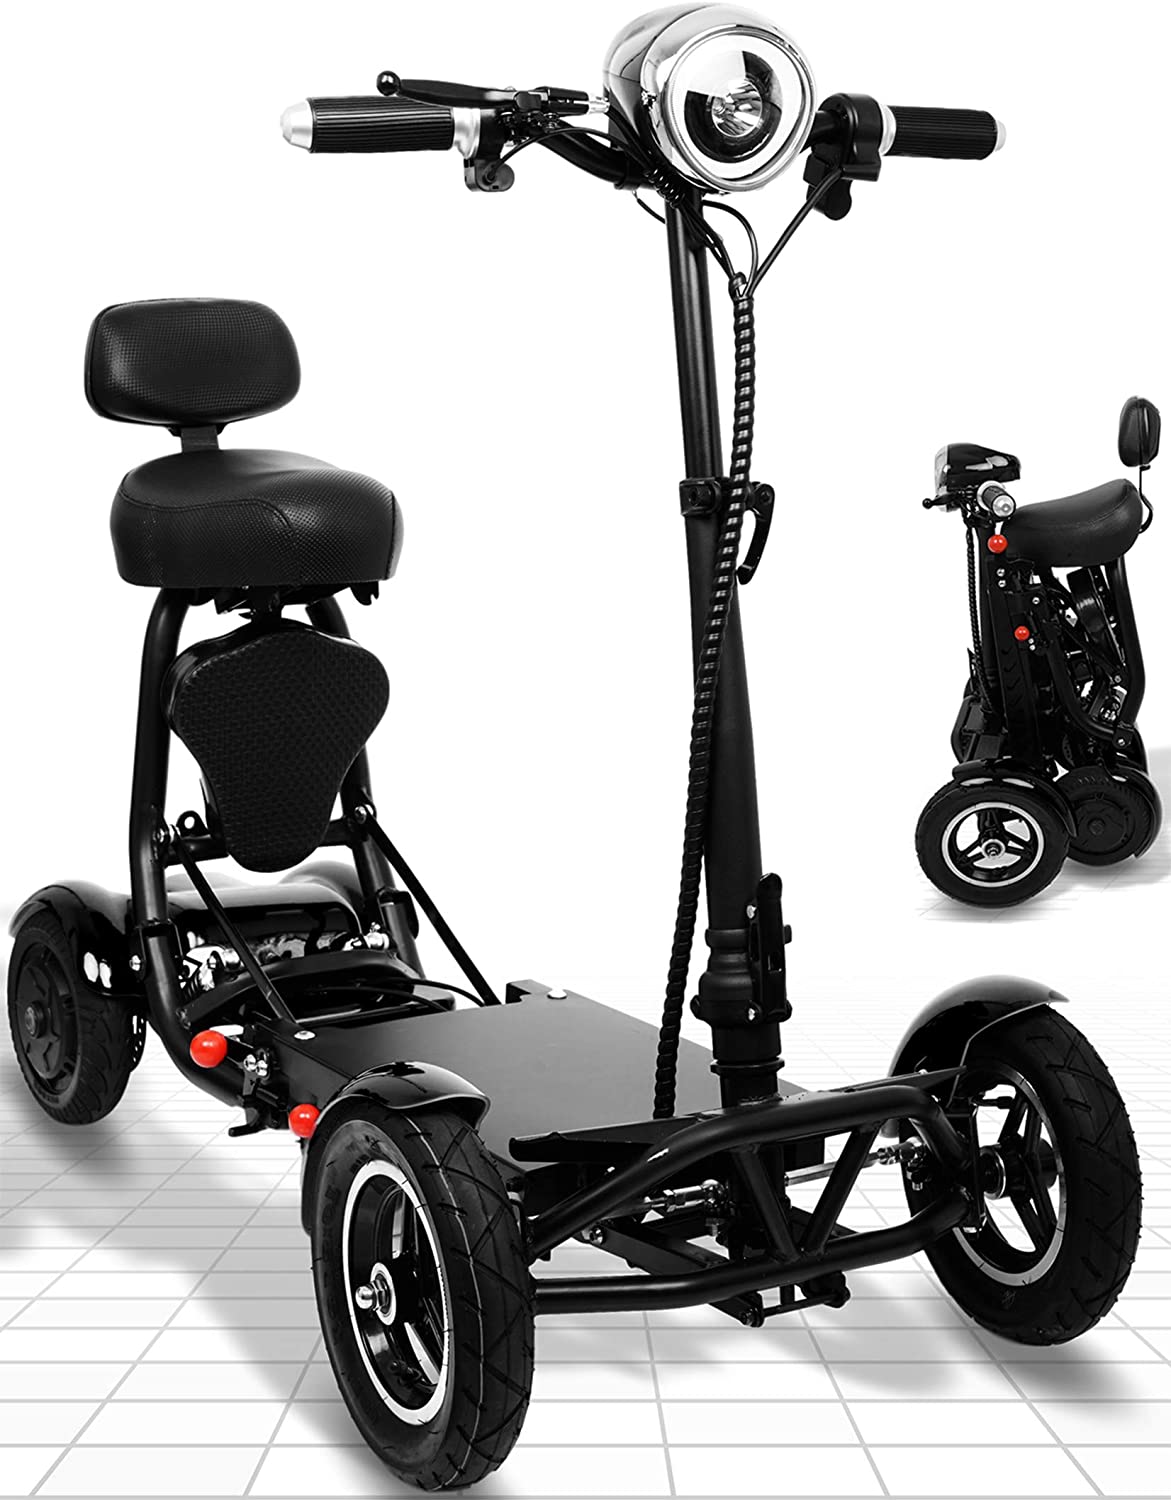 Ephesus (12 Mph) Electric Mobility Scooter With Seat 